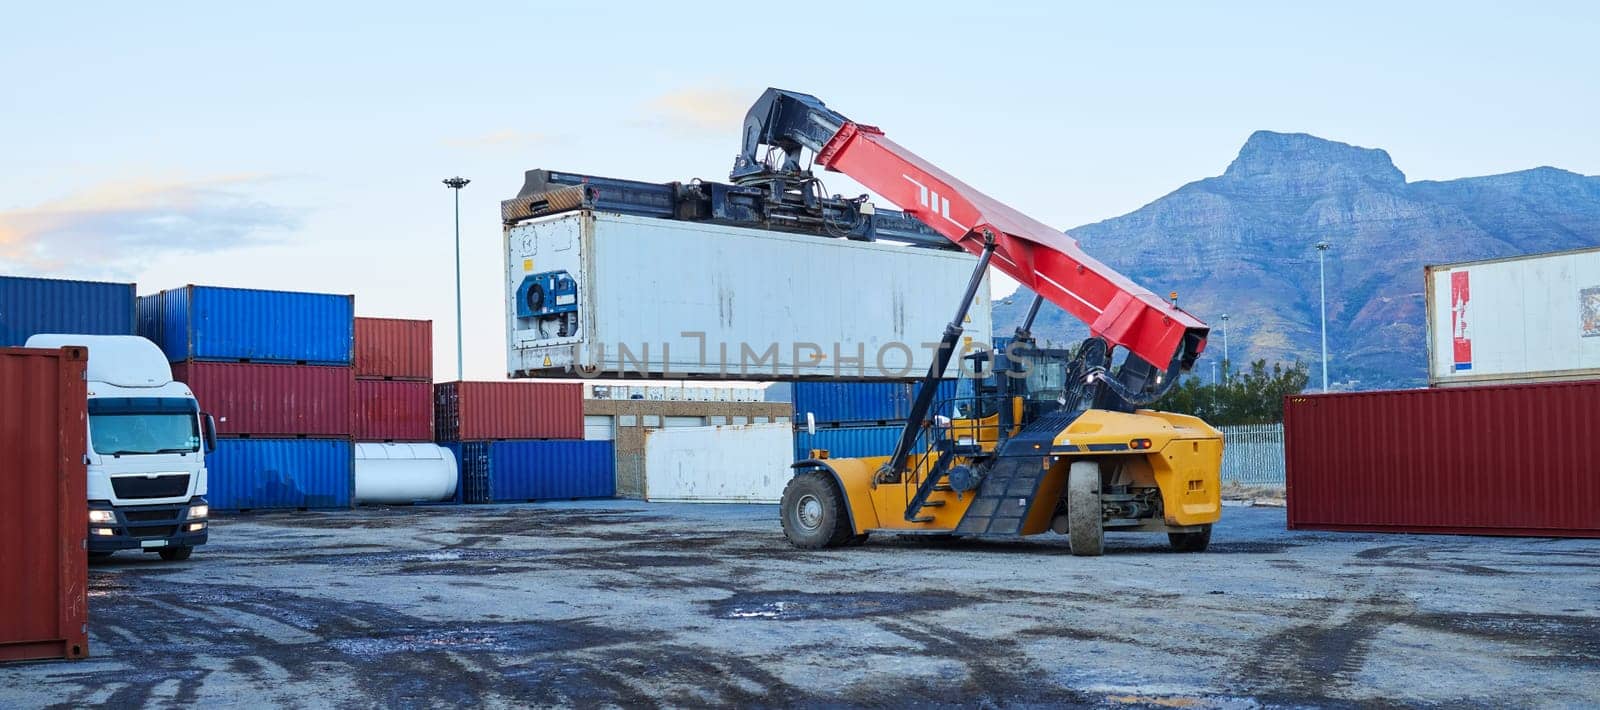 Forklift, shipping logistics and manufacturing container warehouse, cargo industry and industrial factory stock in South Africa. Supply chain production, freight crane and global export distribution.